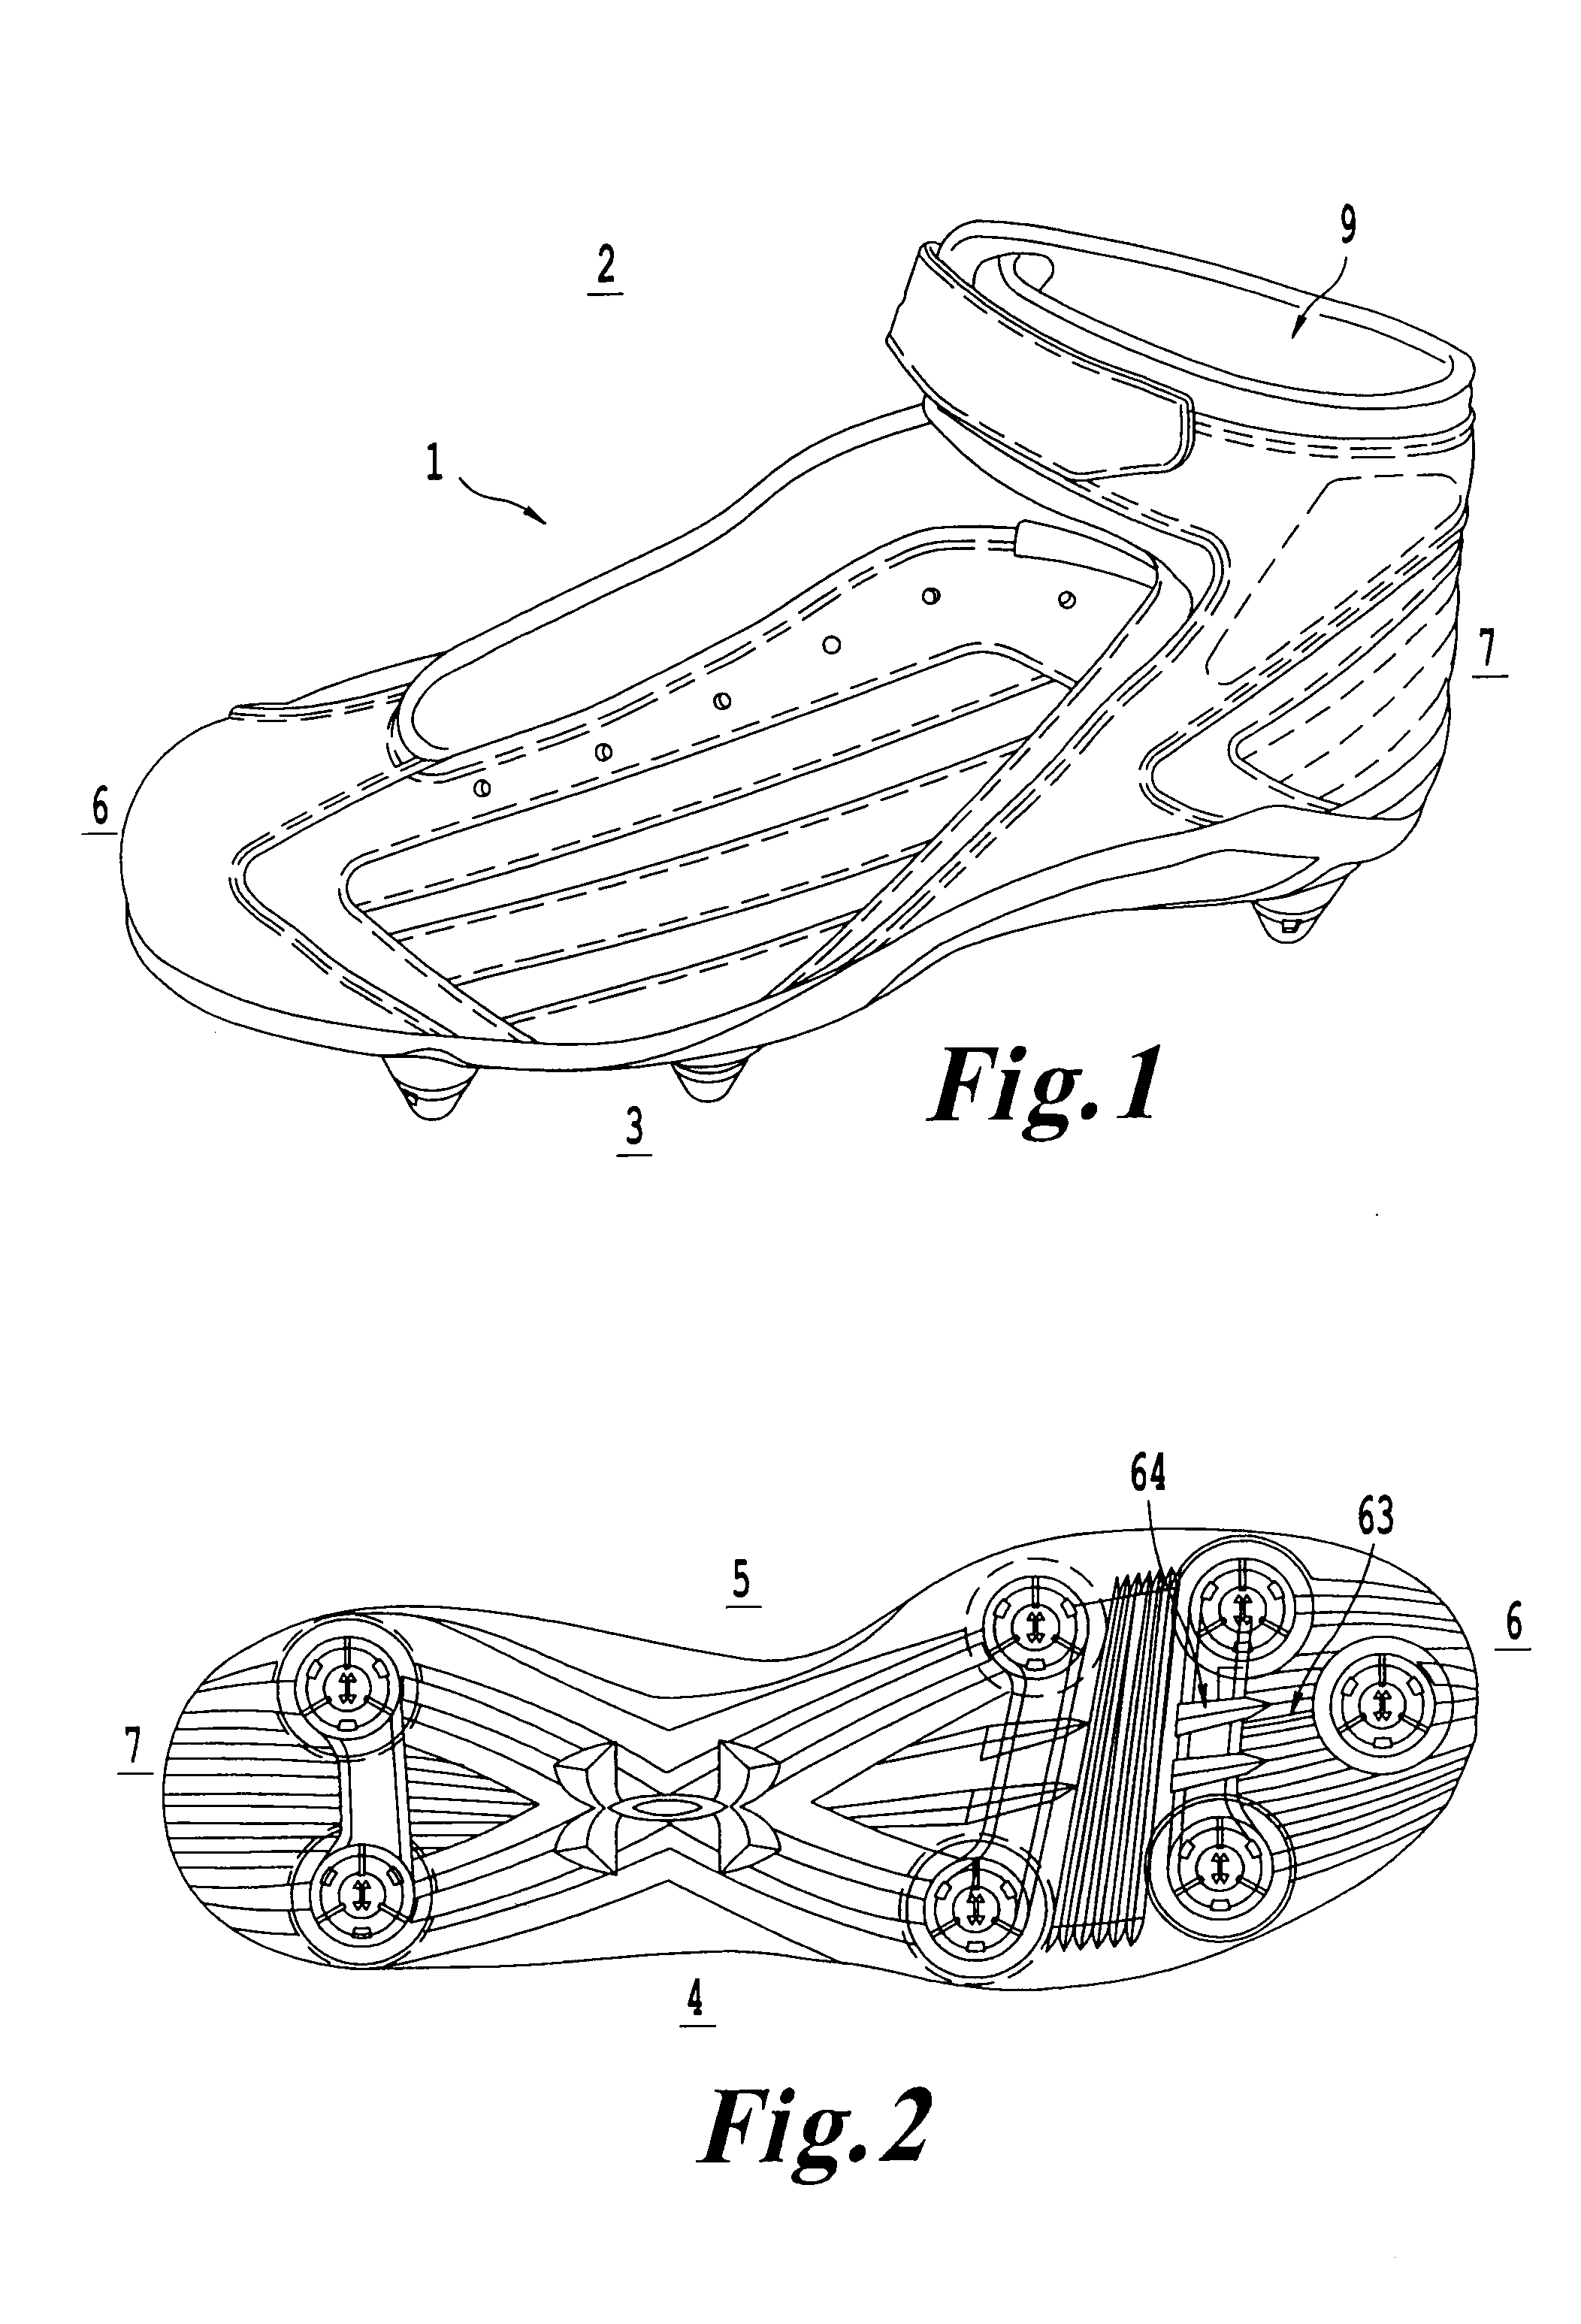 Cleated athletic shoe with cushion structures